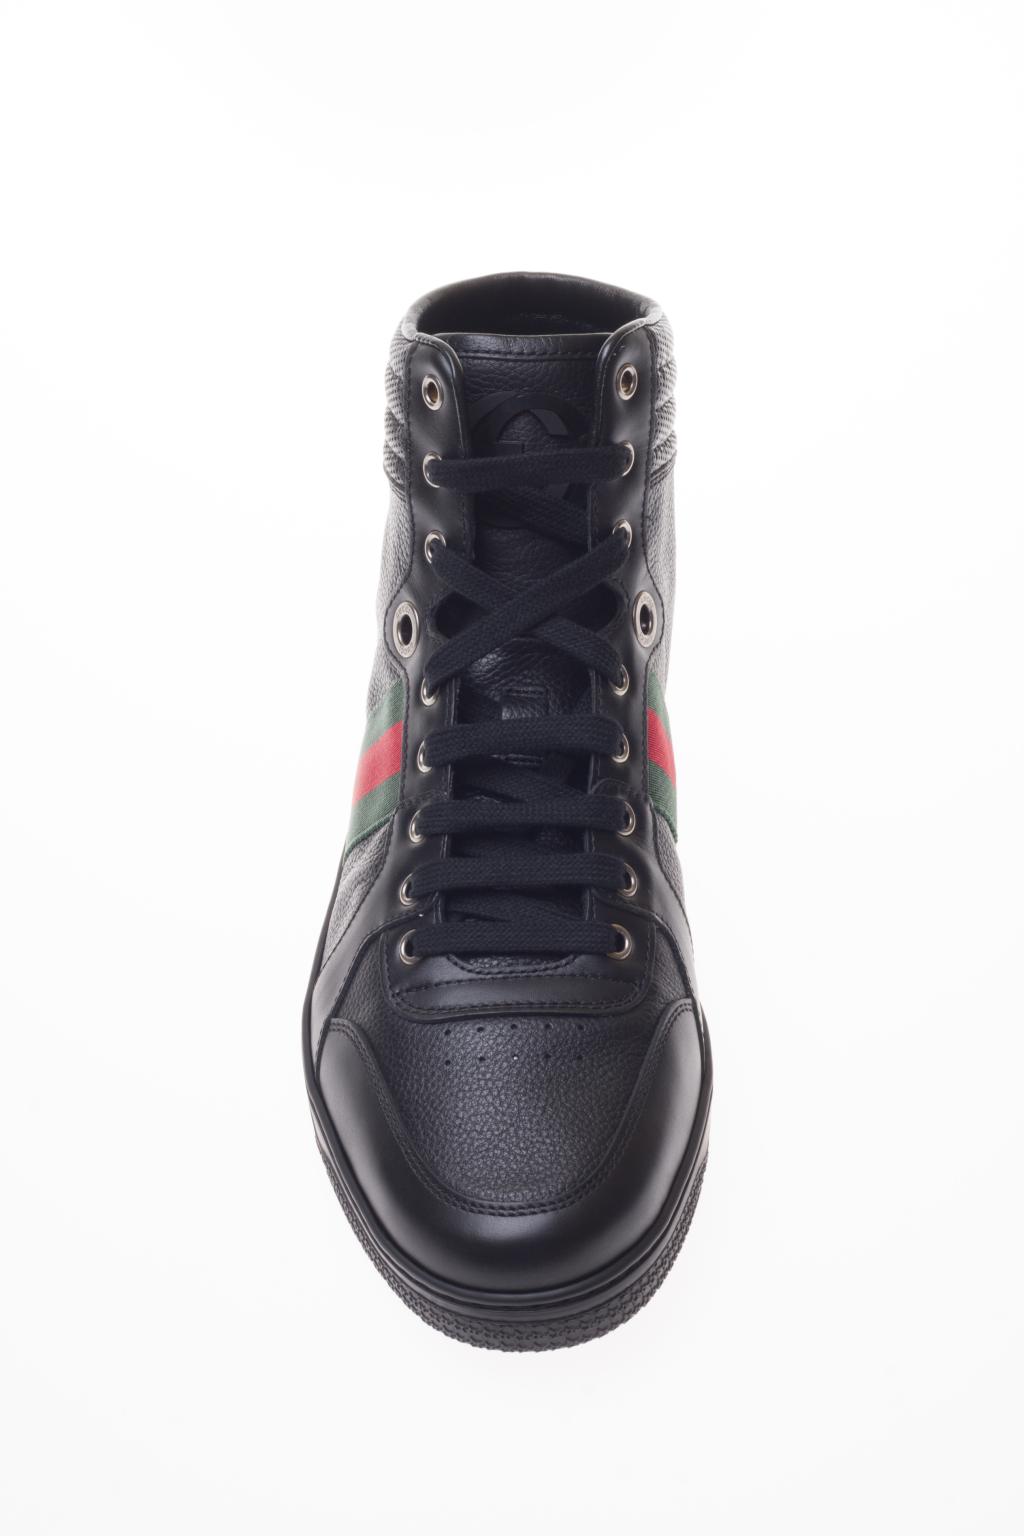 gucci leather high top